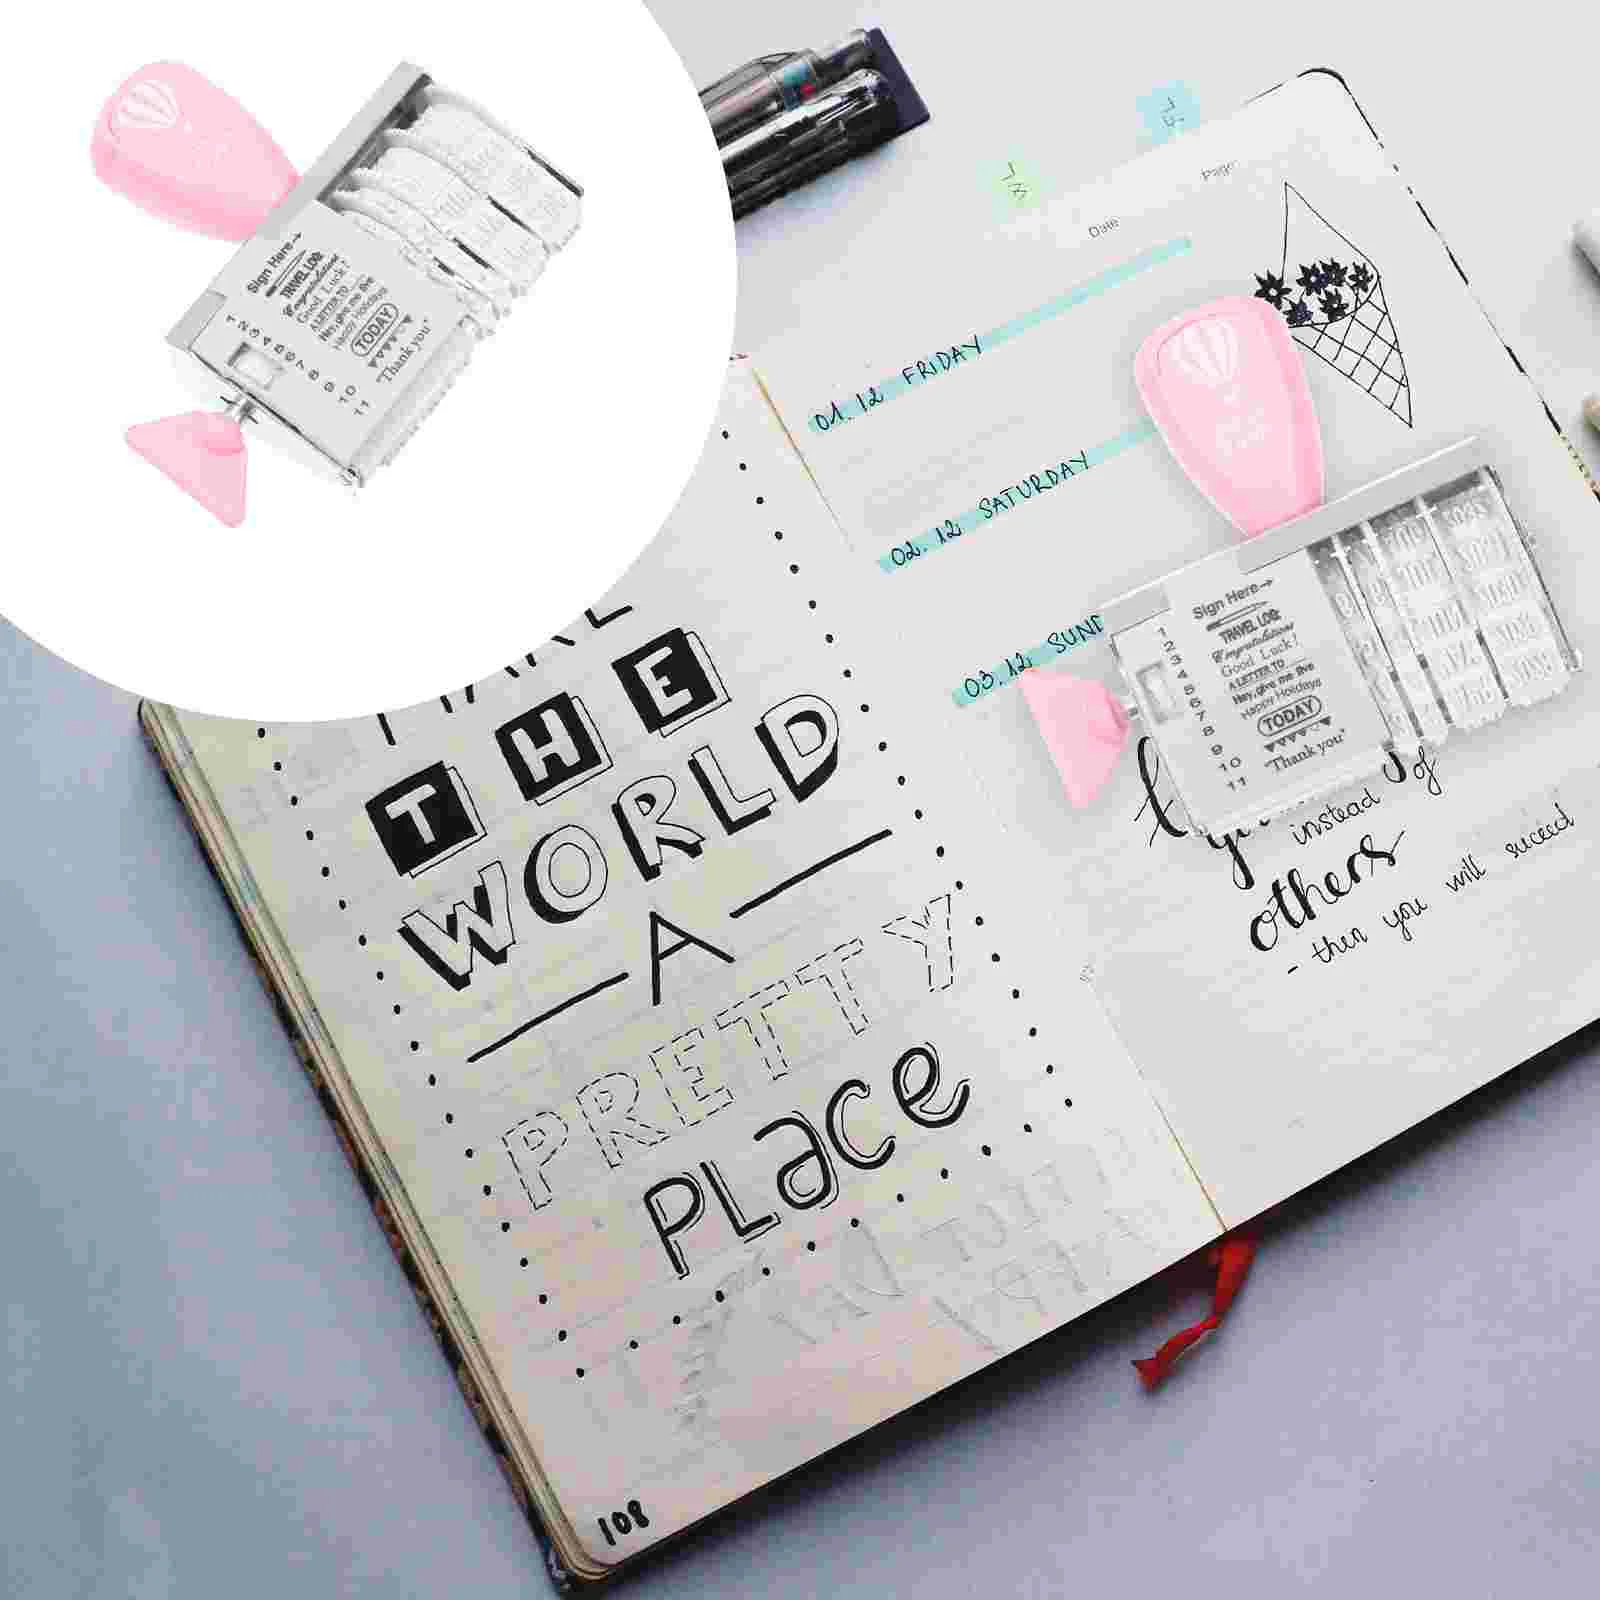 Seal Postage Stamps DIY Planner Knob Useful Date Plastic Rollers Scrapbook Supplies School Stationery 46 pcs box fresh florid mini paper sticker decorative diary scrapbook planner stickers kawaii stationery school supplies